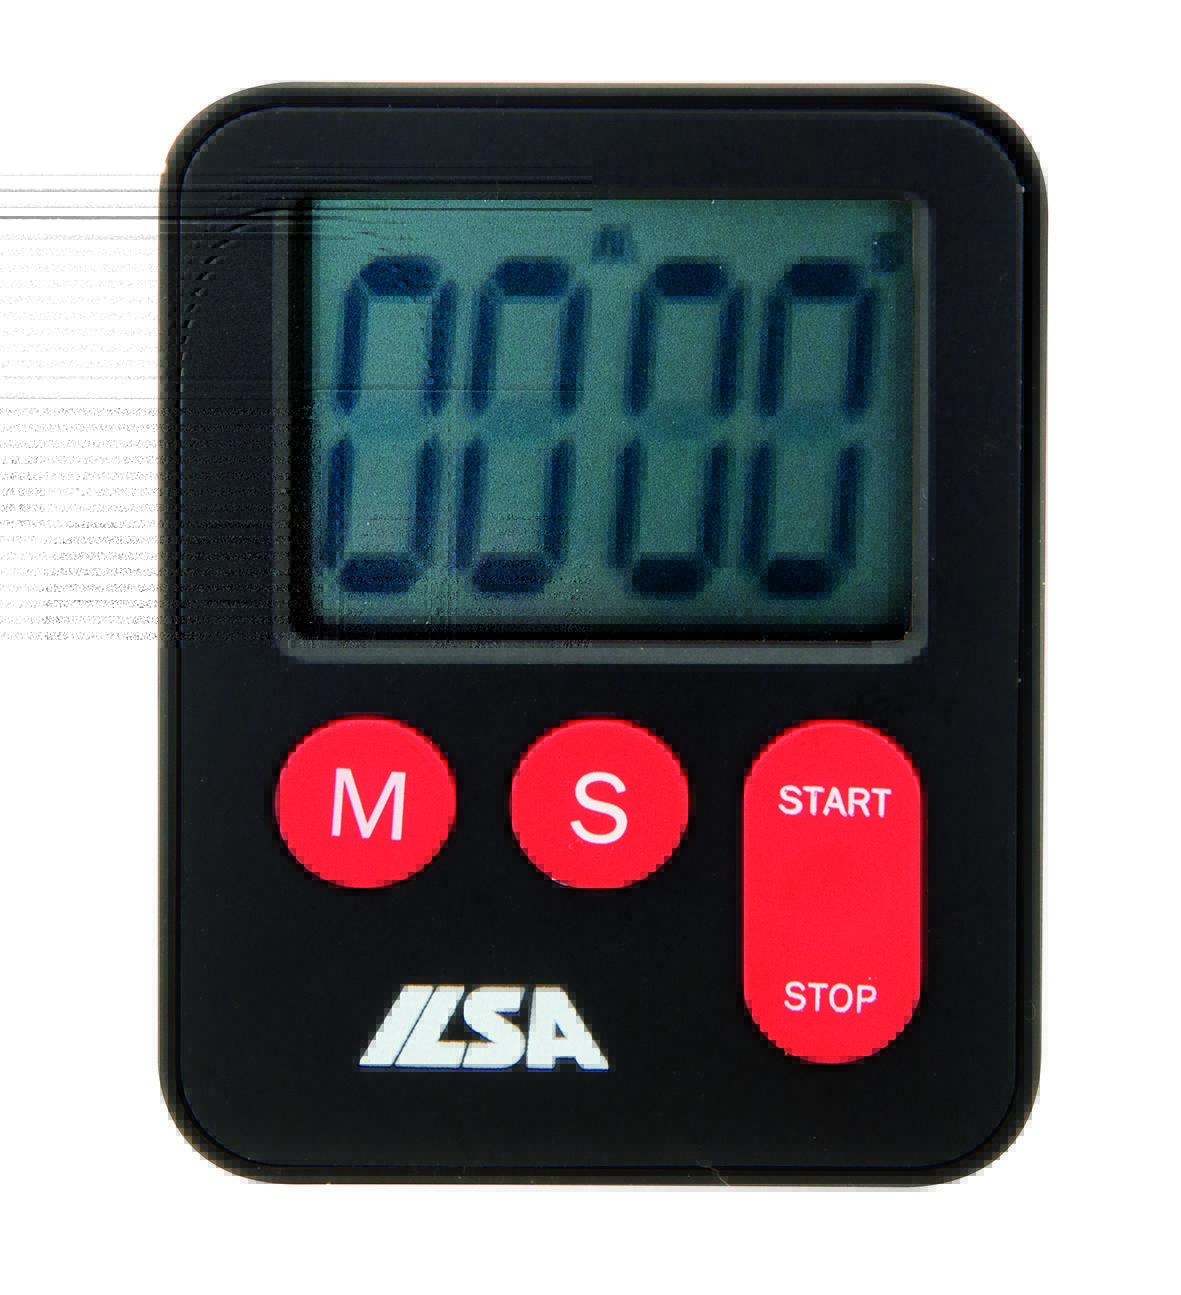 Digital pocket timer - Countdown and count-up feature ABS ILSA Italy